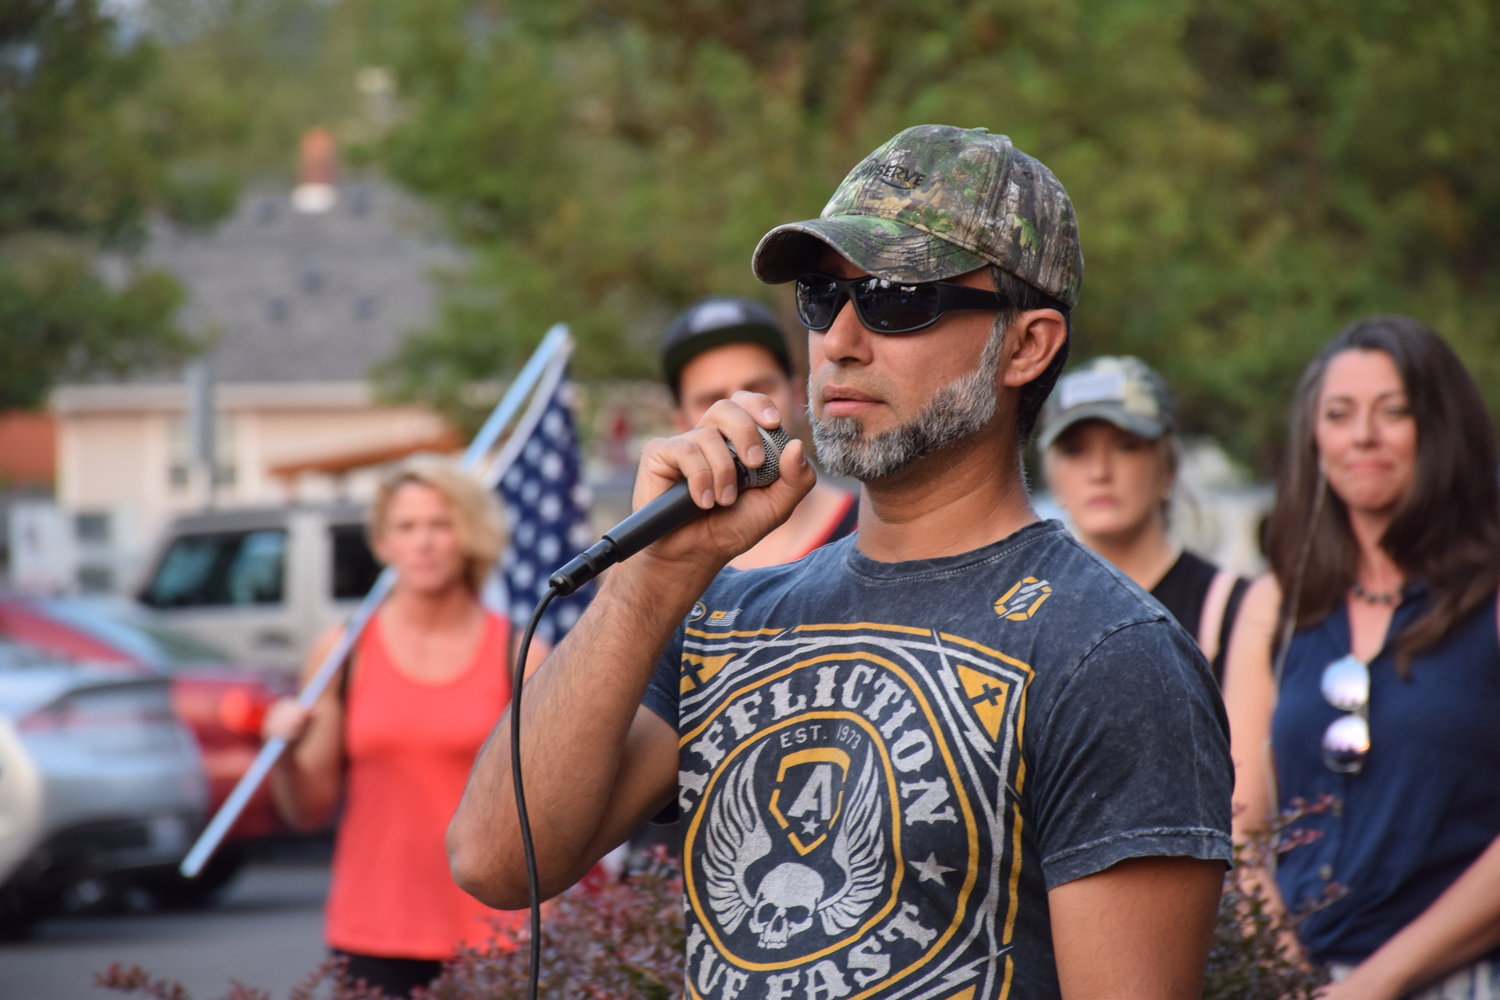 Manny Cortes, brother of Battle Ground Mayor Adrian Cortes, speaks to a crowd gathered in front of city hall on Sept. 7 to support a “medical freedom” ordinance city council is considering.